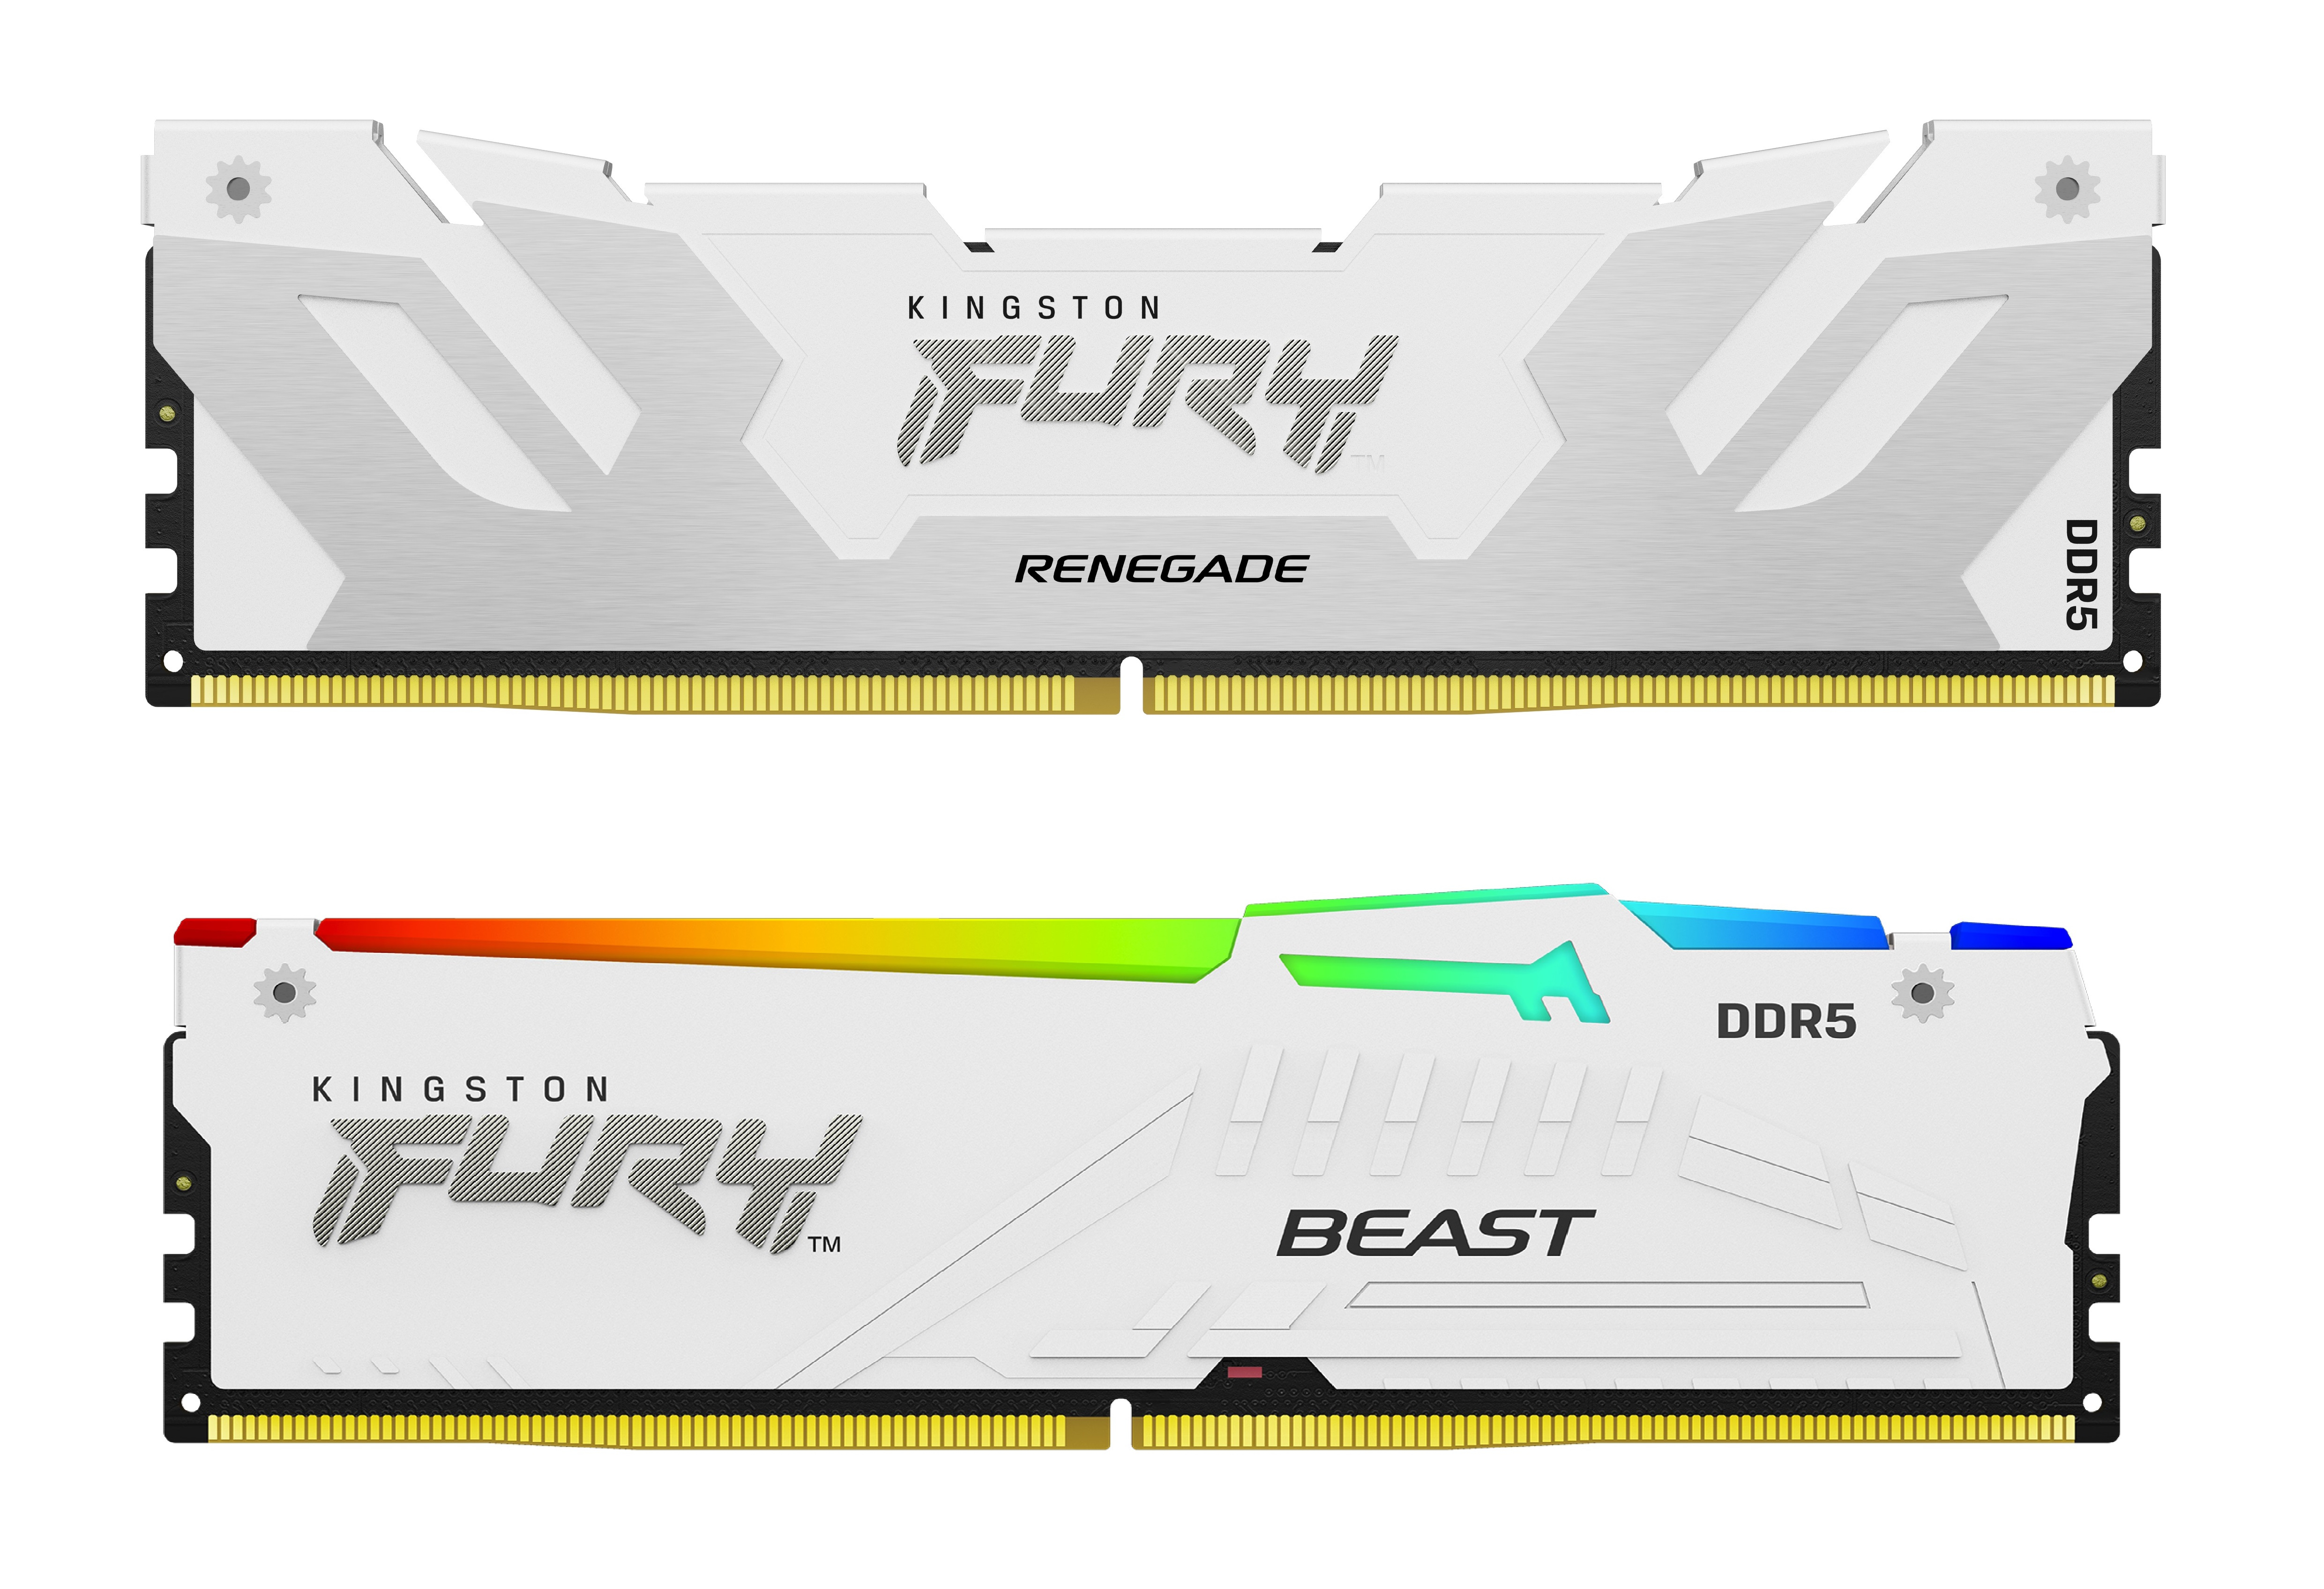 Kingston FURY the Look of DDR5 Lineup | Business Wire